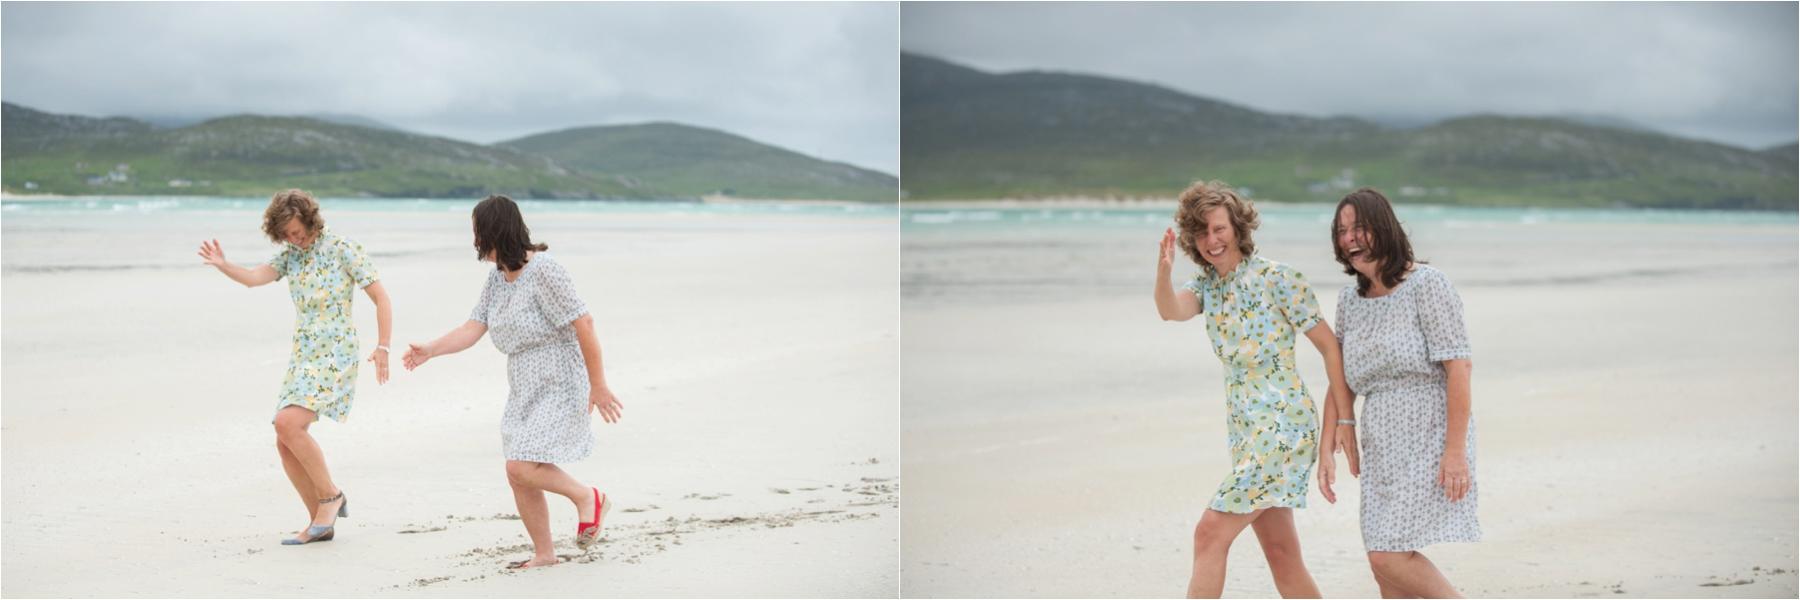 Luskentyre Beach wedding photography by photographer Margaret Soraya. Two brides hold hands on the deserted Outer Hebrides beach after their marriage. 